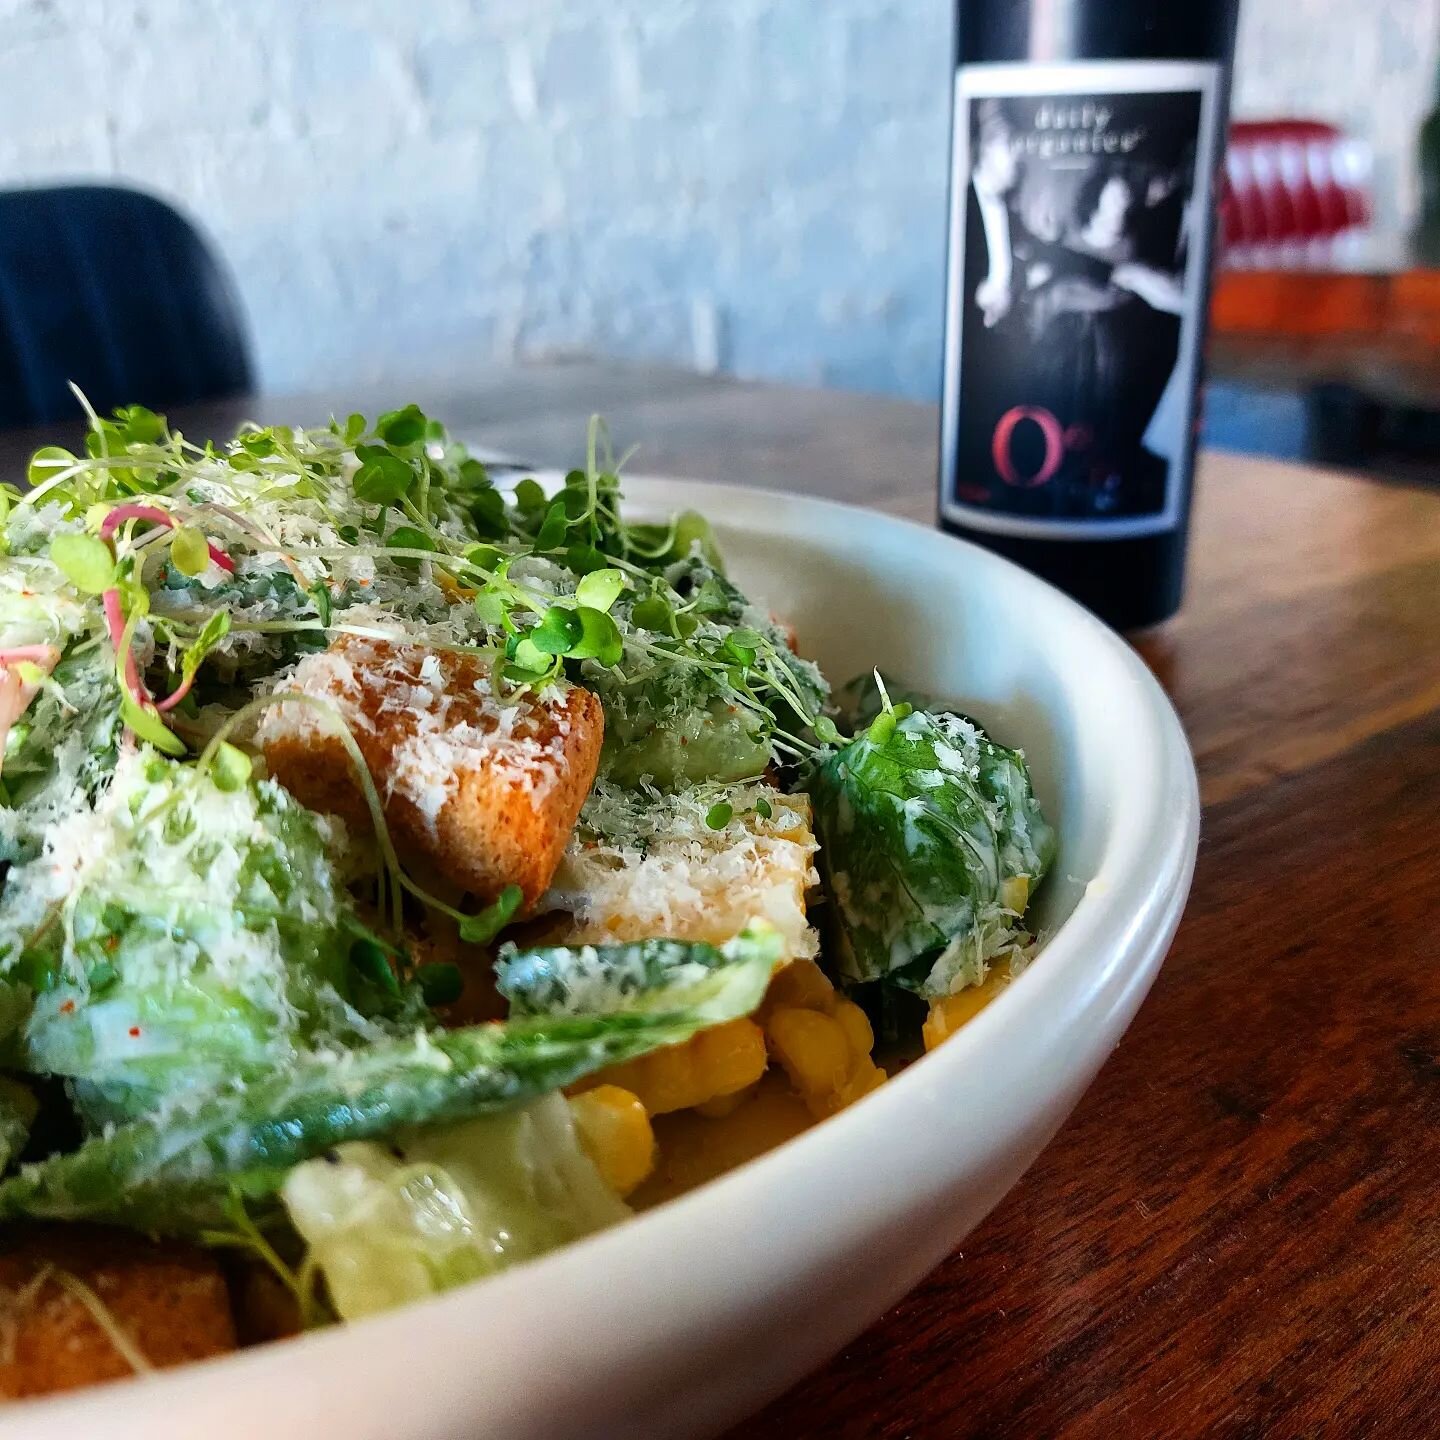 Bambuchisan is closed tomorrow (Tues 6th) for Waitangi Day - back at it on Weds from 5pm! Enjoy the (kinda) long weekend, and dream of our saucy cheesy caesar salad 🤤

#hataitai #neighbourhoodbarandeatery #suburbaneatery #longweekend #glutenfreerest